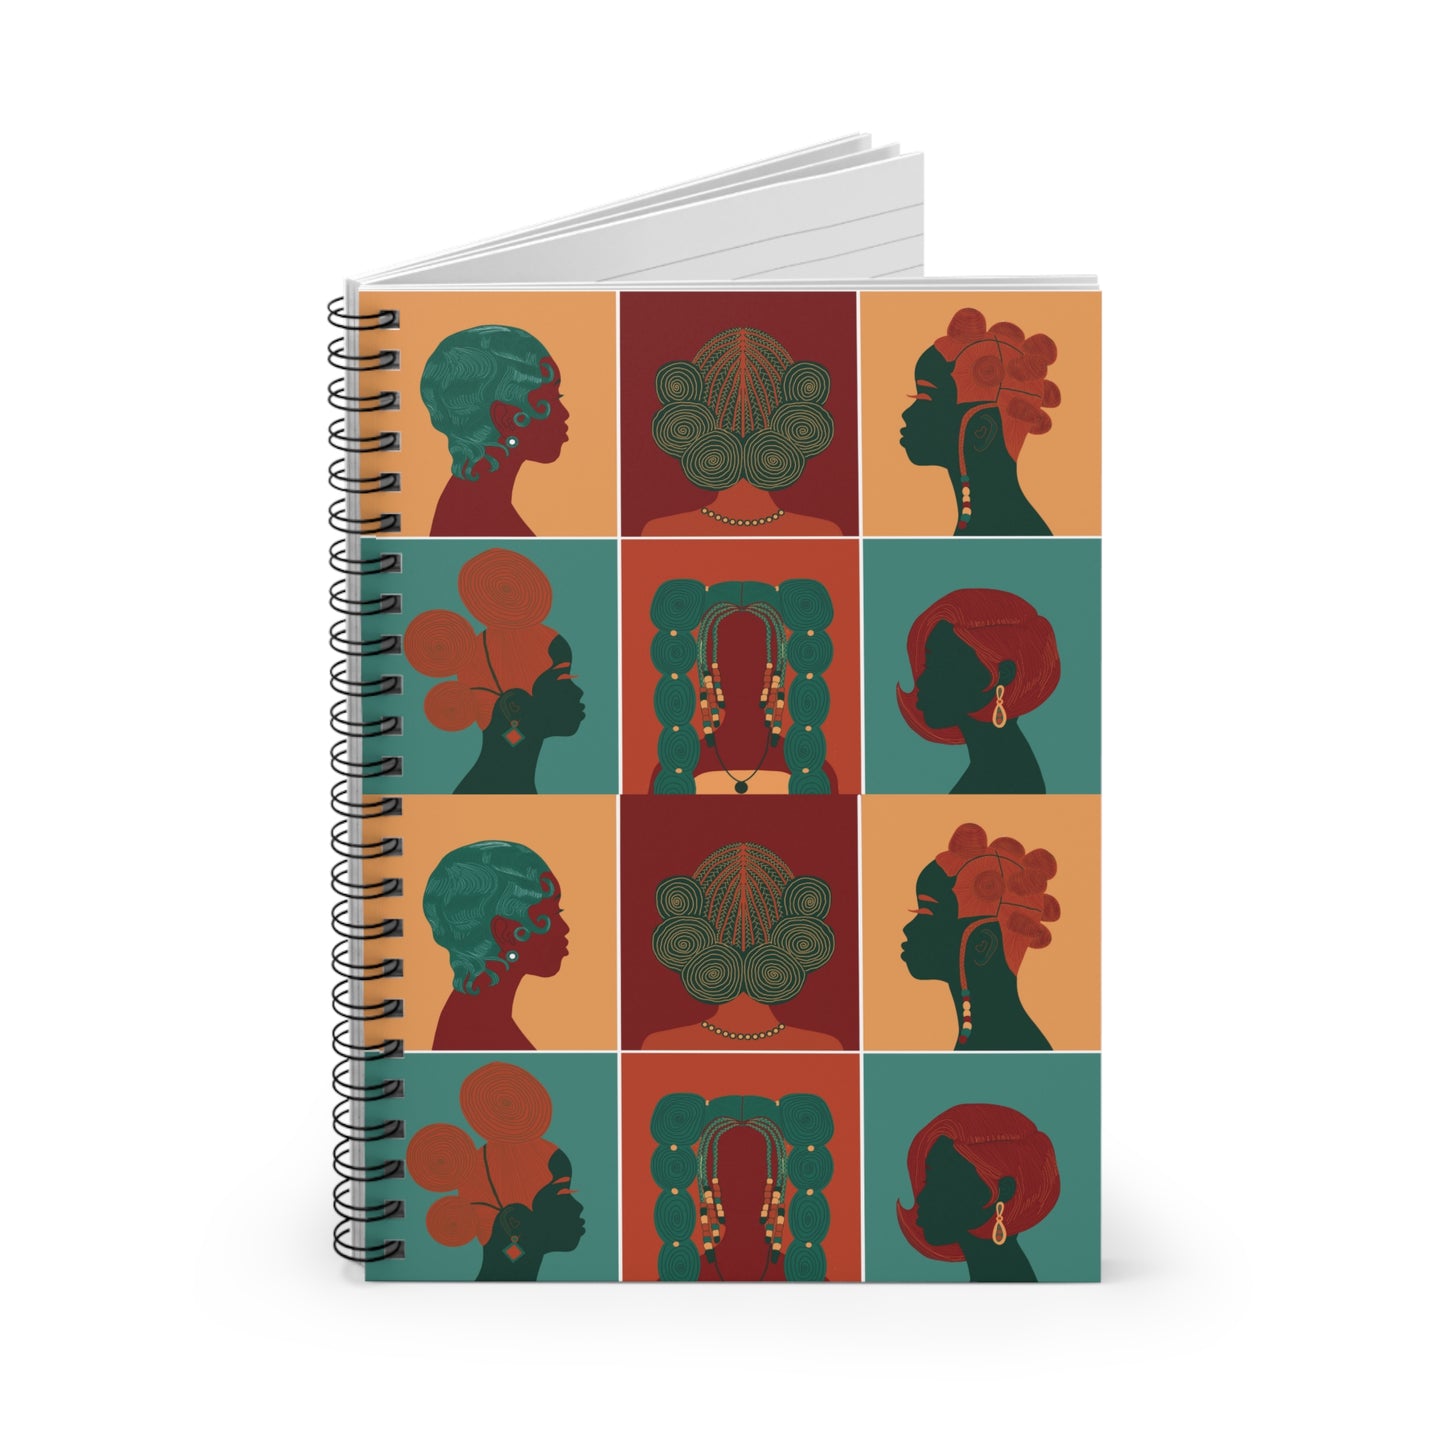 Don't Touch My Hair Spiral Notebook - Ruled Line "Don't Touch My Hair Collection"